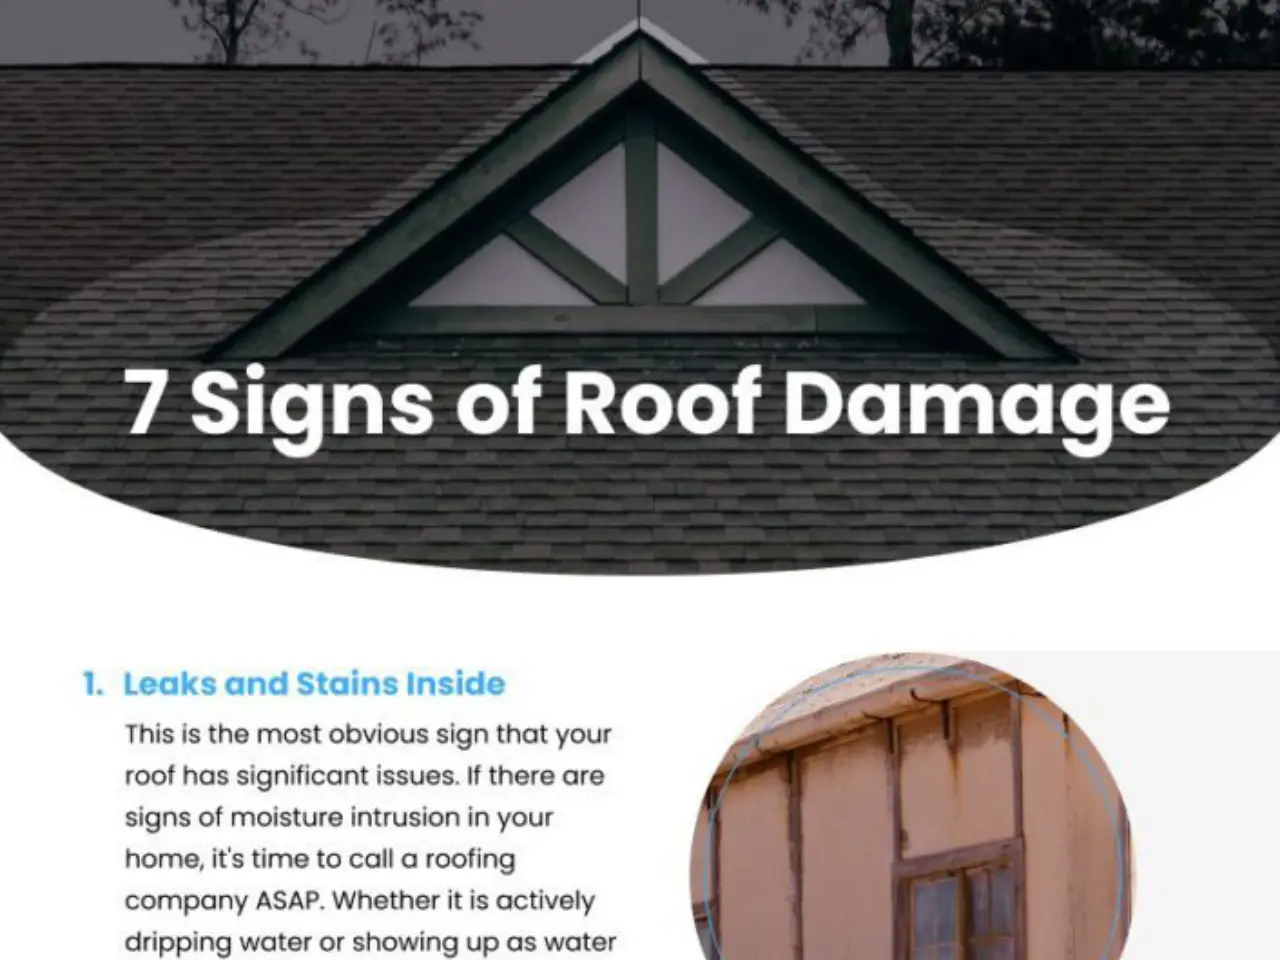 Top 7 Signs of Roof Damage